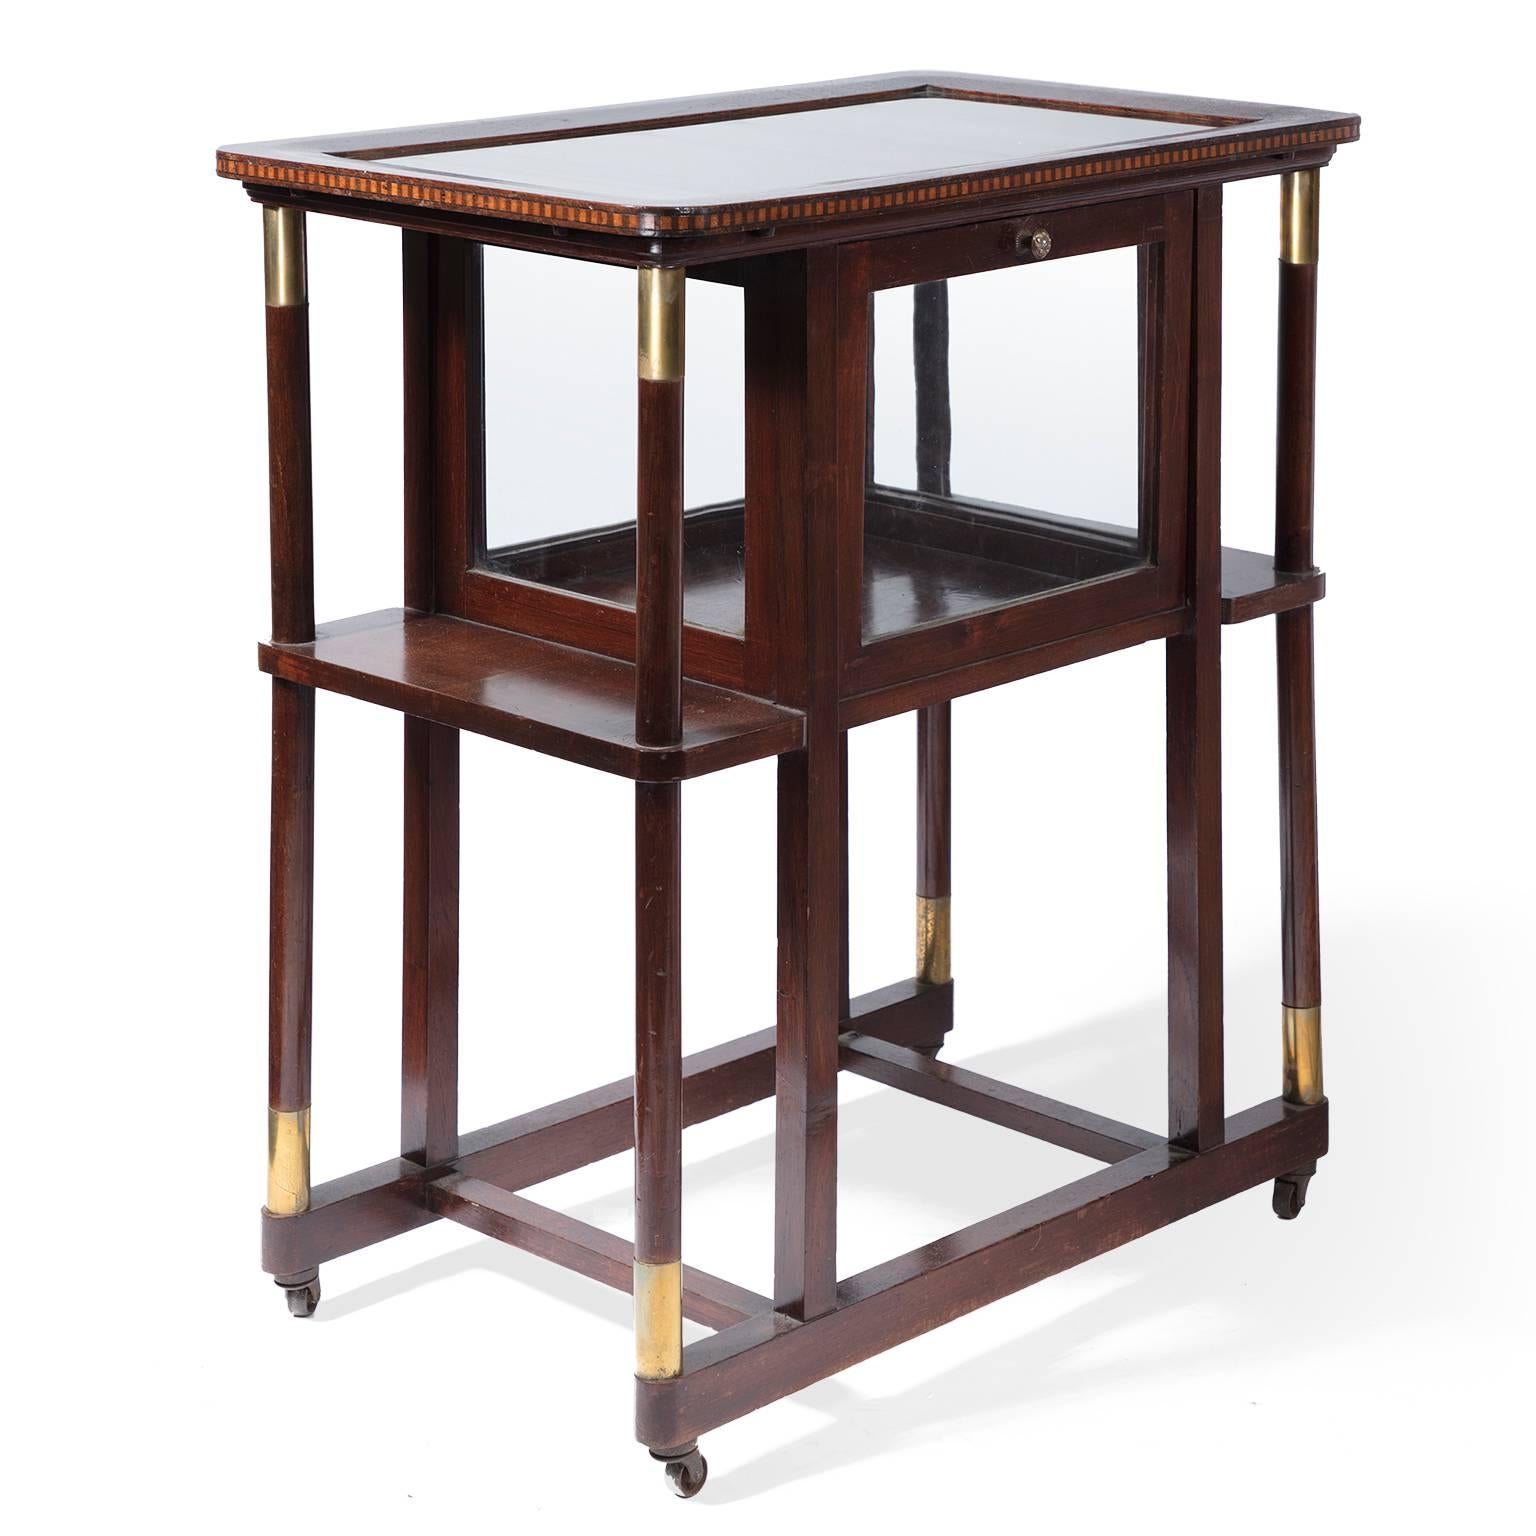 In wood, brass and glass, this early 20th century Austrian bar cart includes two tiers, a removable tray top and hinged glass doors, for easy access to a transparent liquor cabinet. Fine metal details and an inlaid edge add to its bespoke charm,